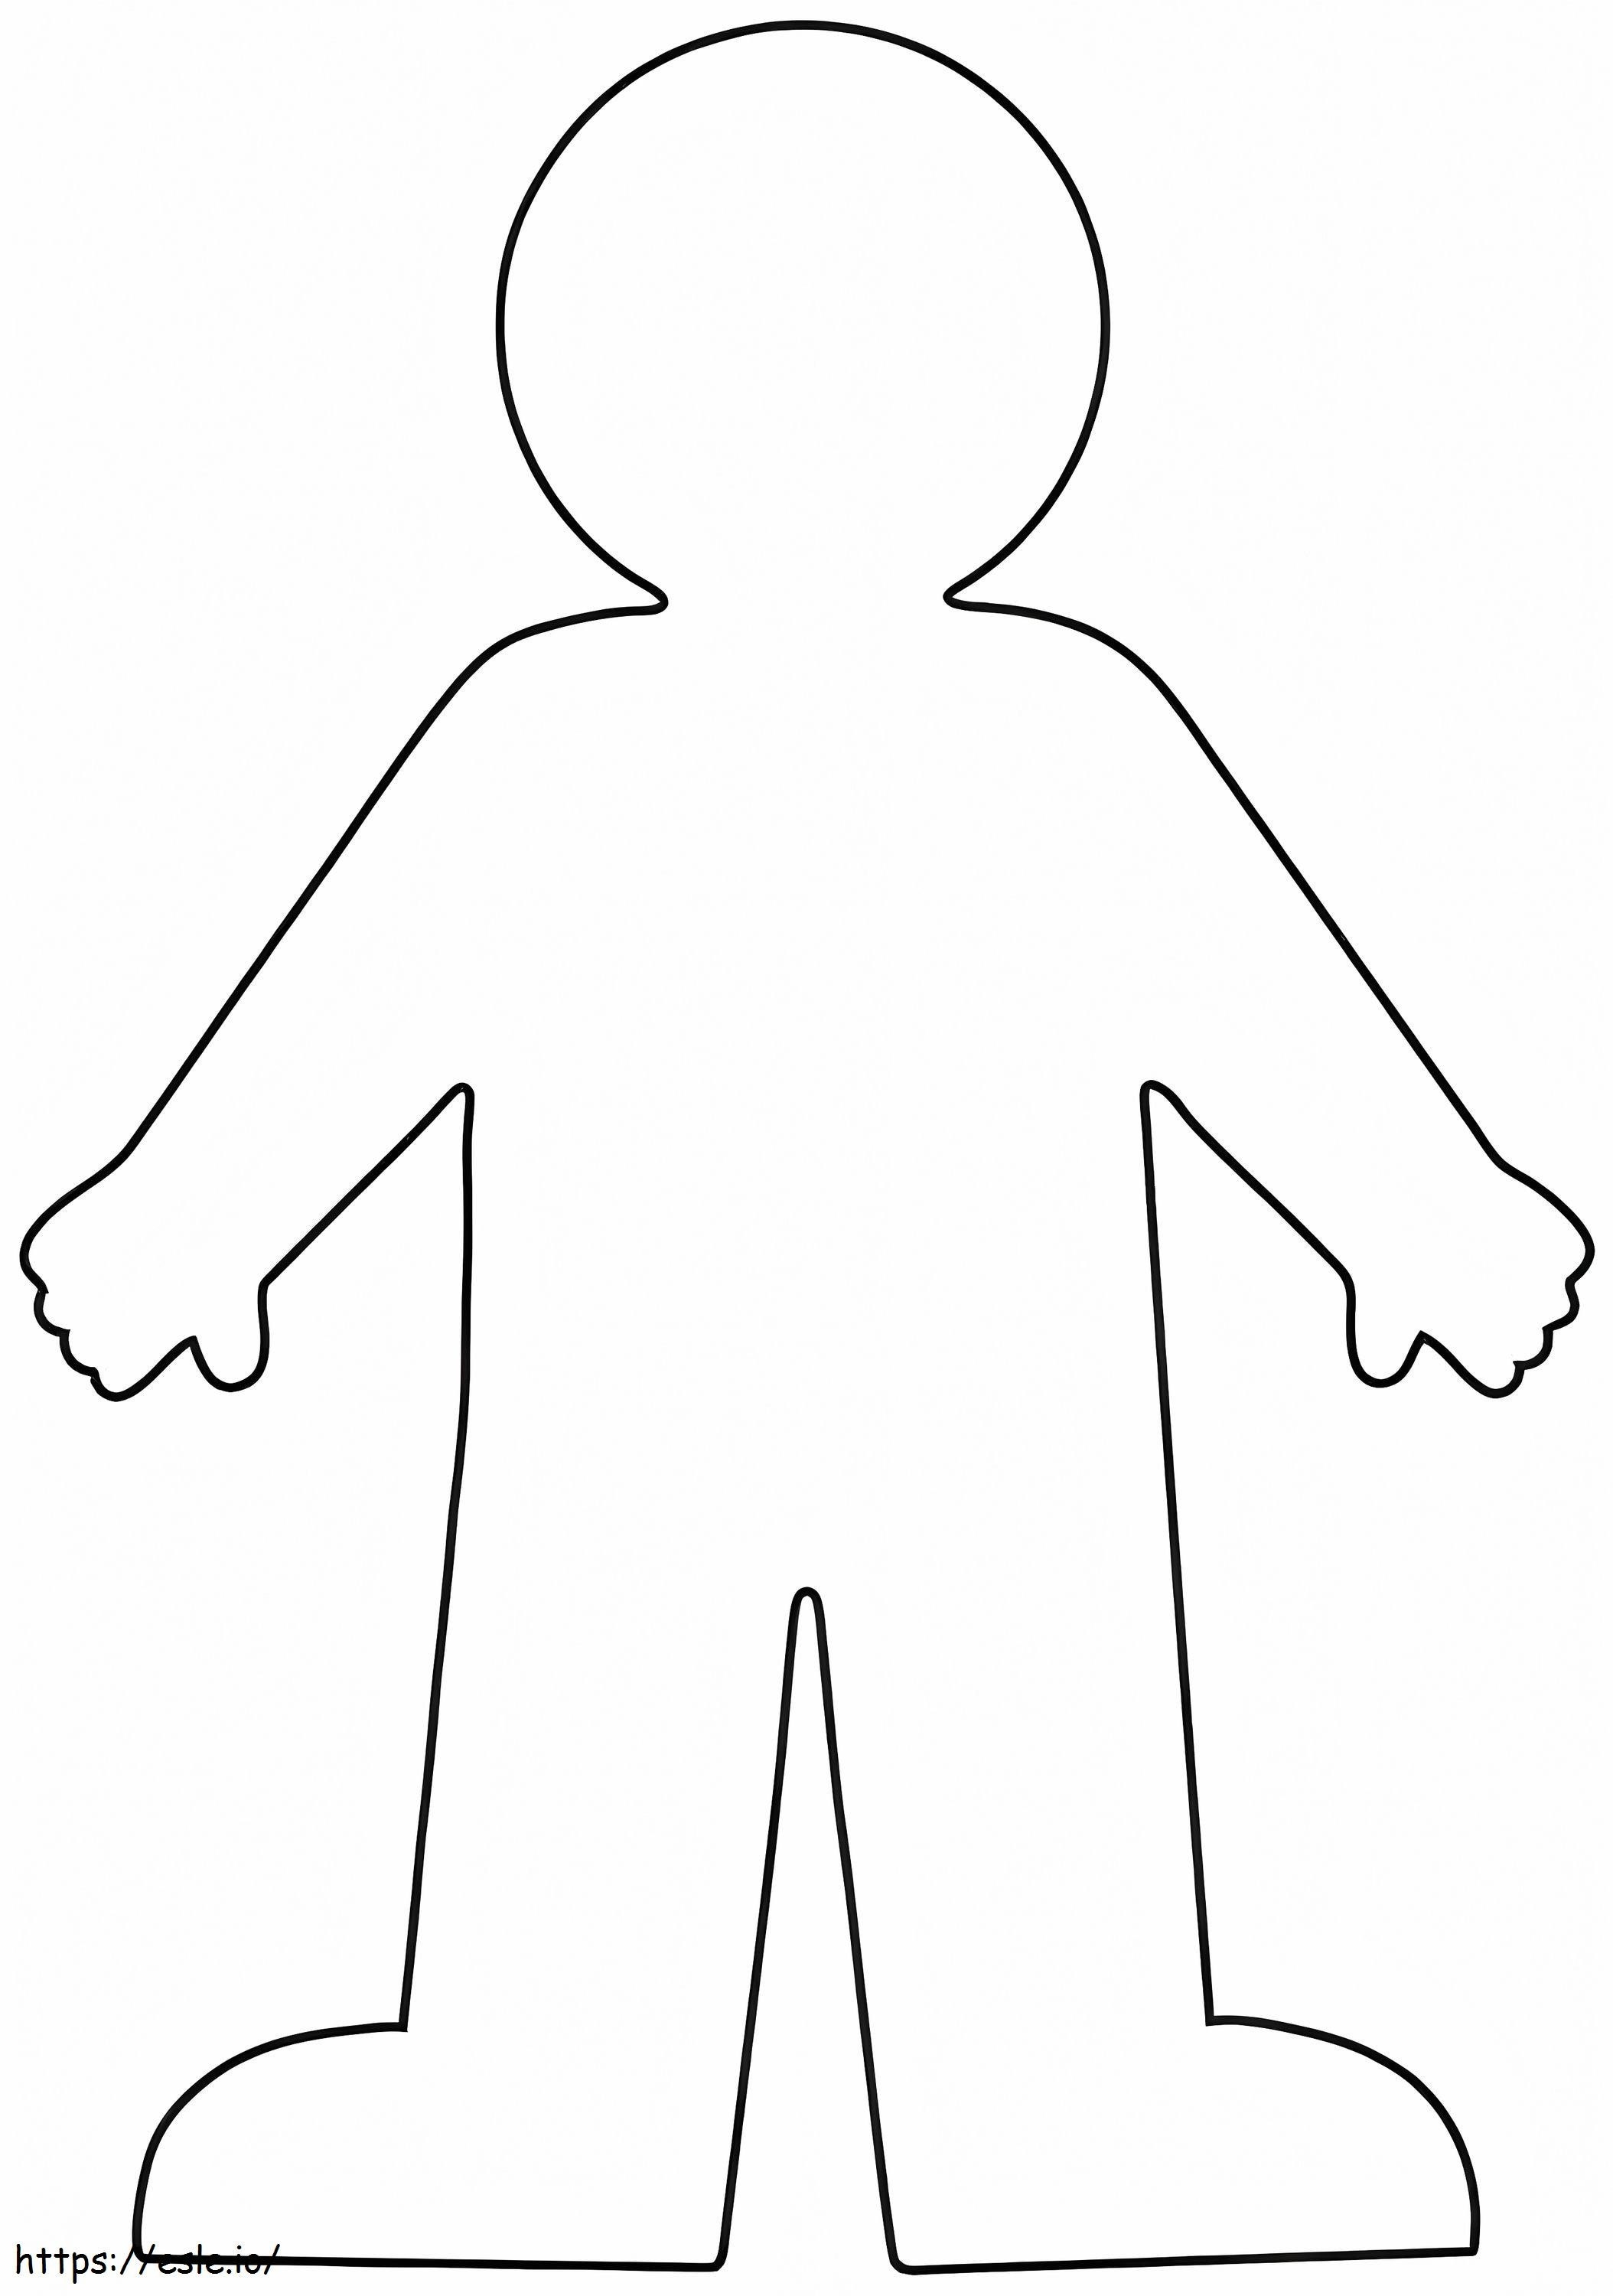 Big Person Outline coloring page